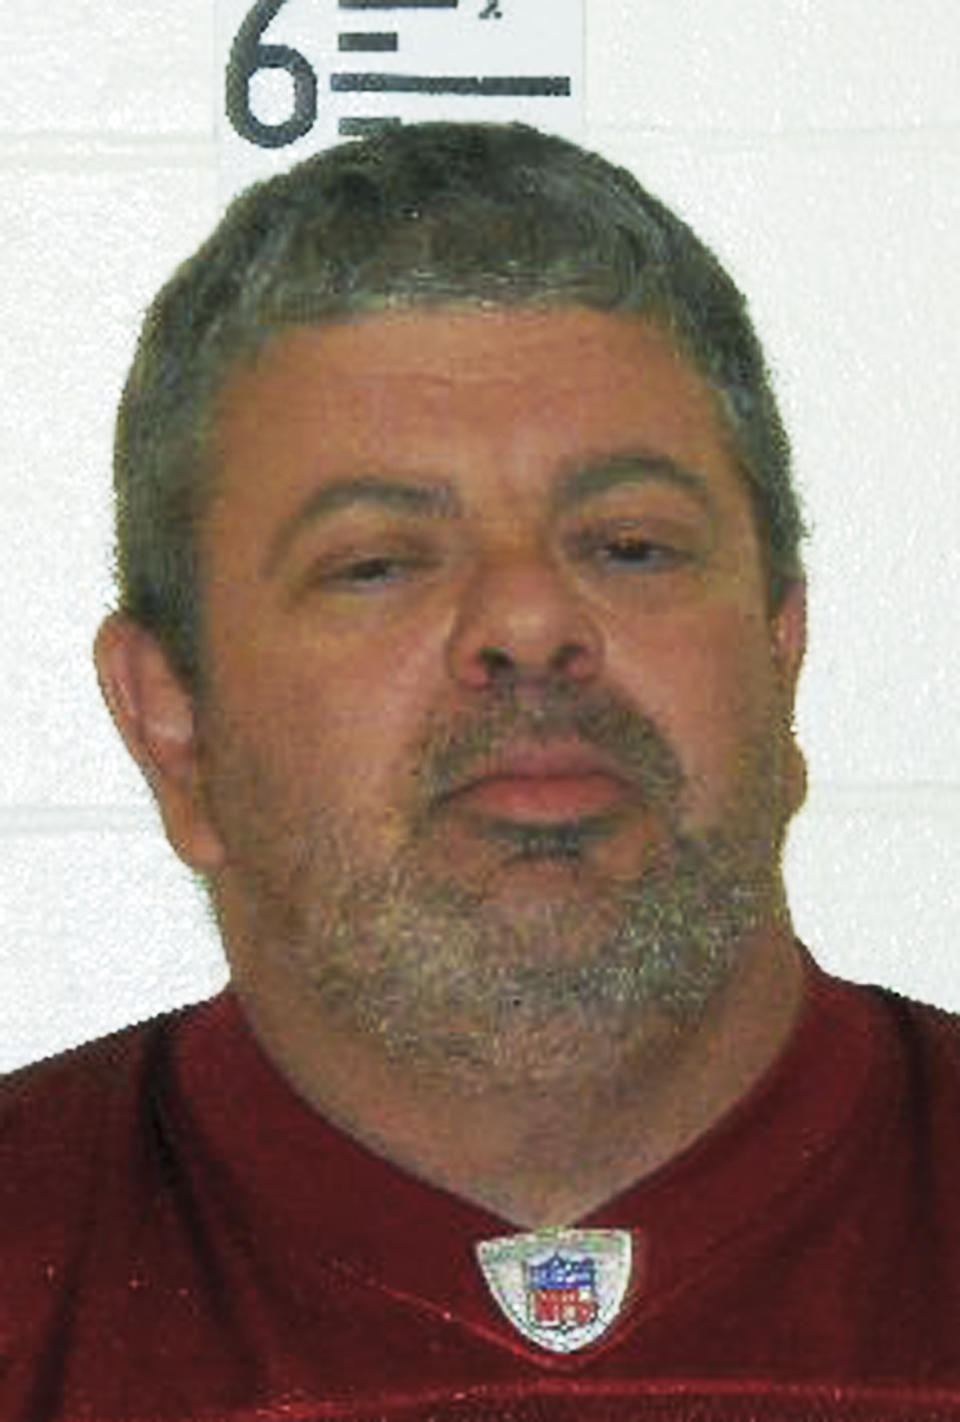 This booking photograph released by the Maine State Police shows Timothy Courtois, who was arrested Sunday, July 22, 2012 on charges of having a concealed weapon and speeding on the Maine Turnpike. Courtois told authorities he was on his way to Derry, N.H., to shoot a former employer. He also said he had attended the Batman movie at the Cinemagic Theater in Saco the previous night. Found in his car were an assault weapon, four handguns and several boxes of ammunition. A search of his home in Biddeford, Maine, revealed several additional guns, including a machine gun, and thousands of rounds of ammunition. (AP Photo/Maine State Police)